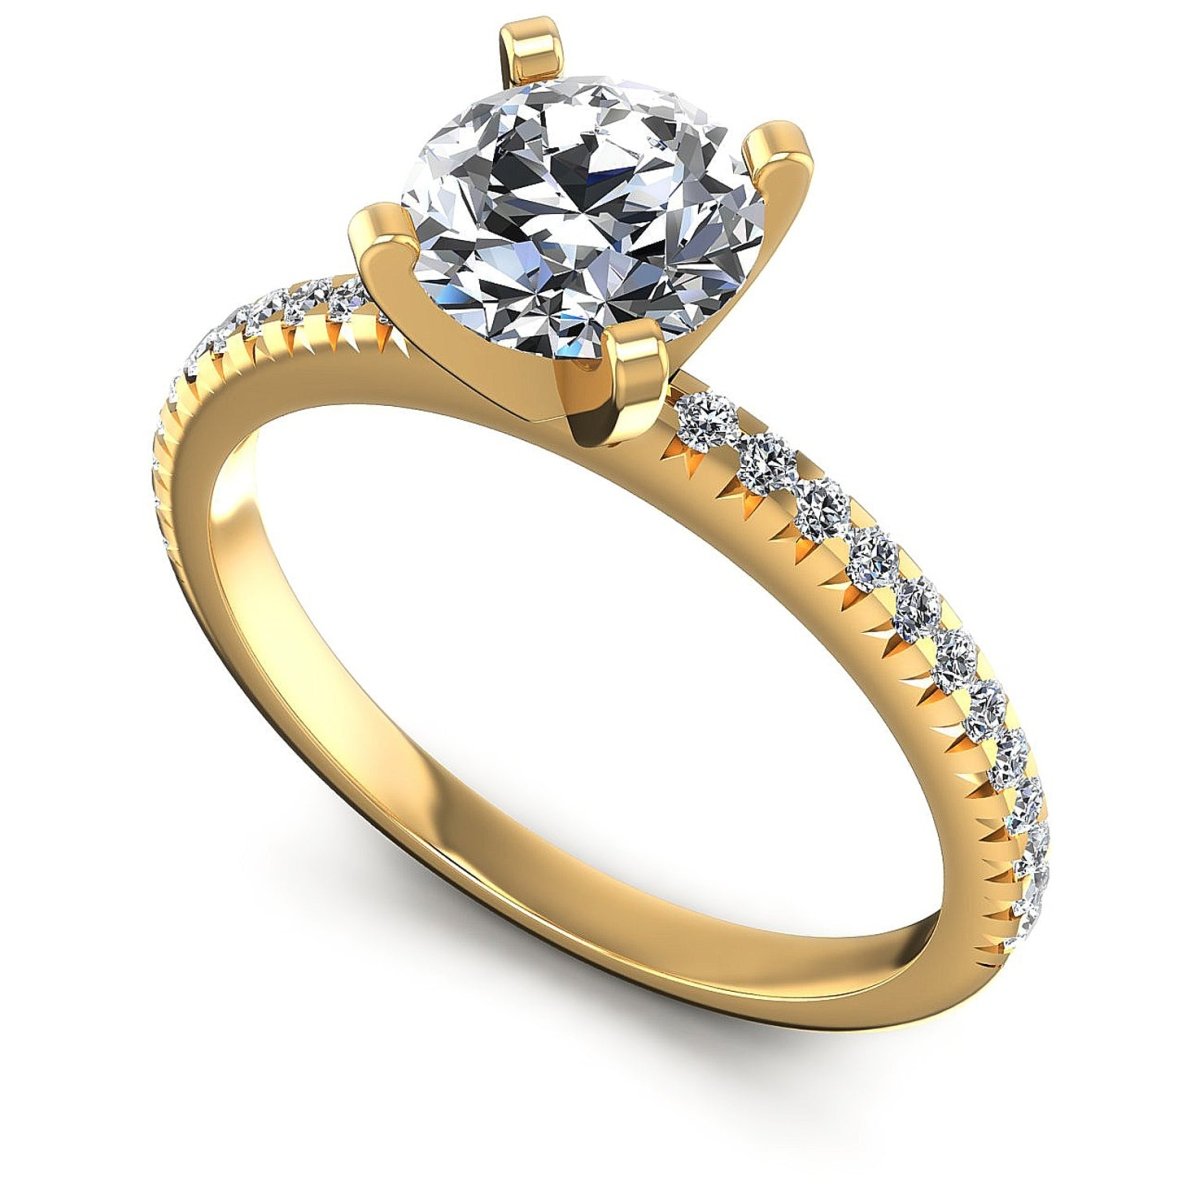 Rare 1.00CT Round Cut Diamond Engagement Ring in 14KT Yellow Gold - Primestyle.com